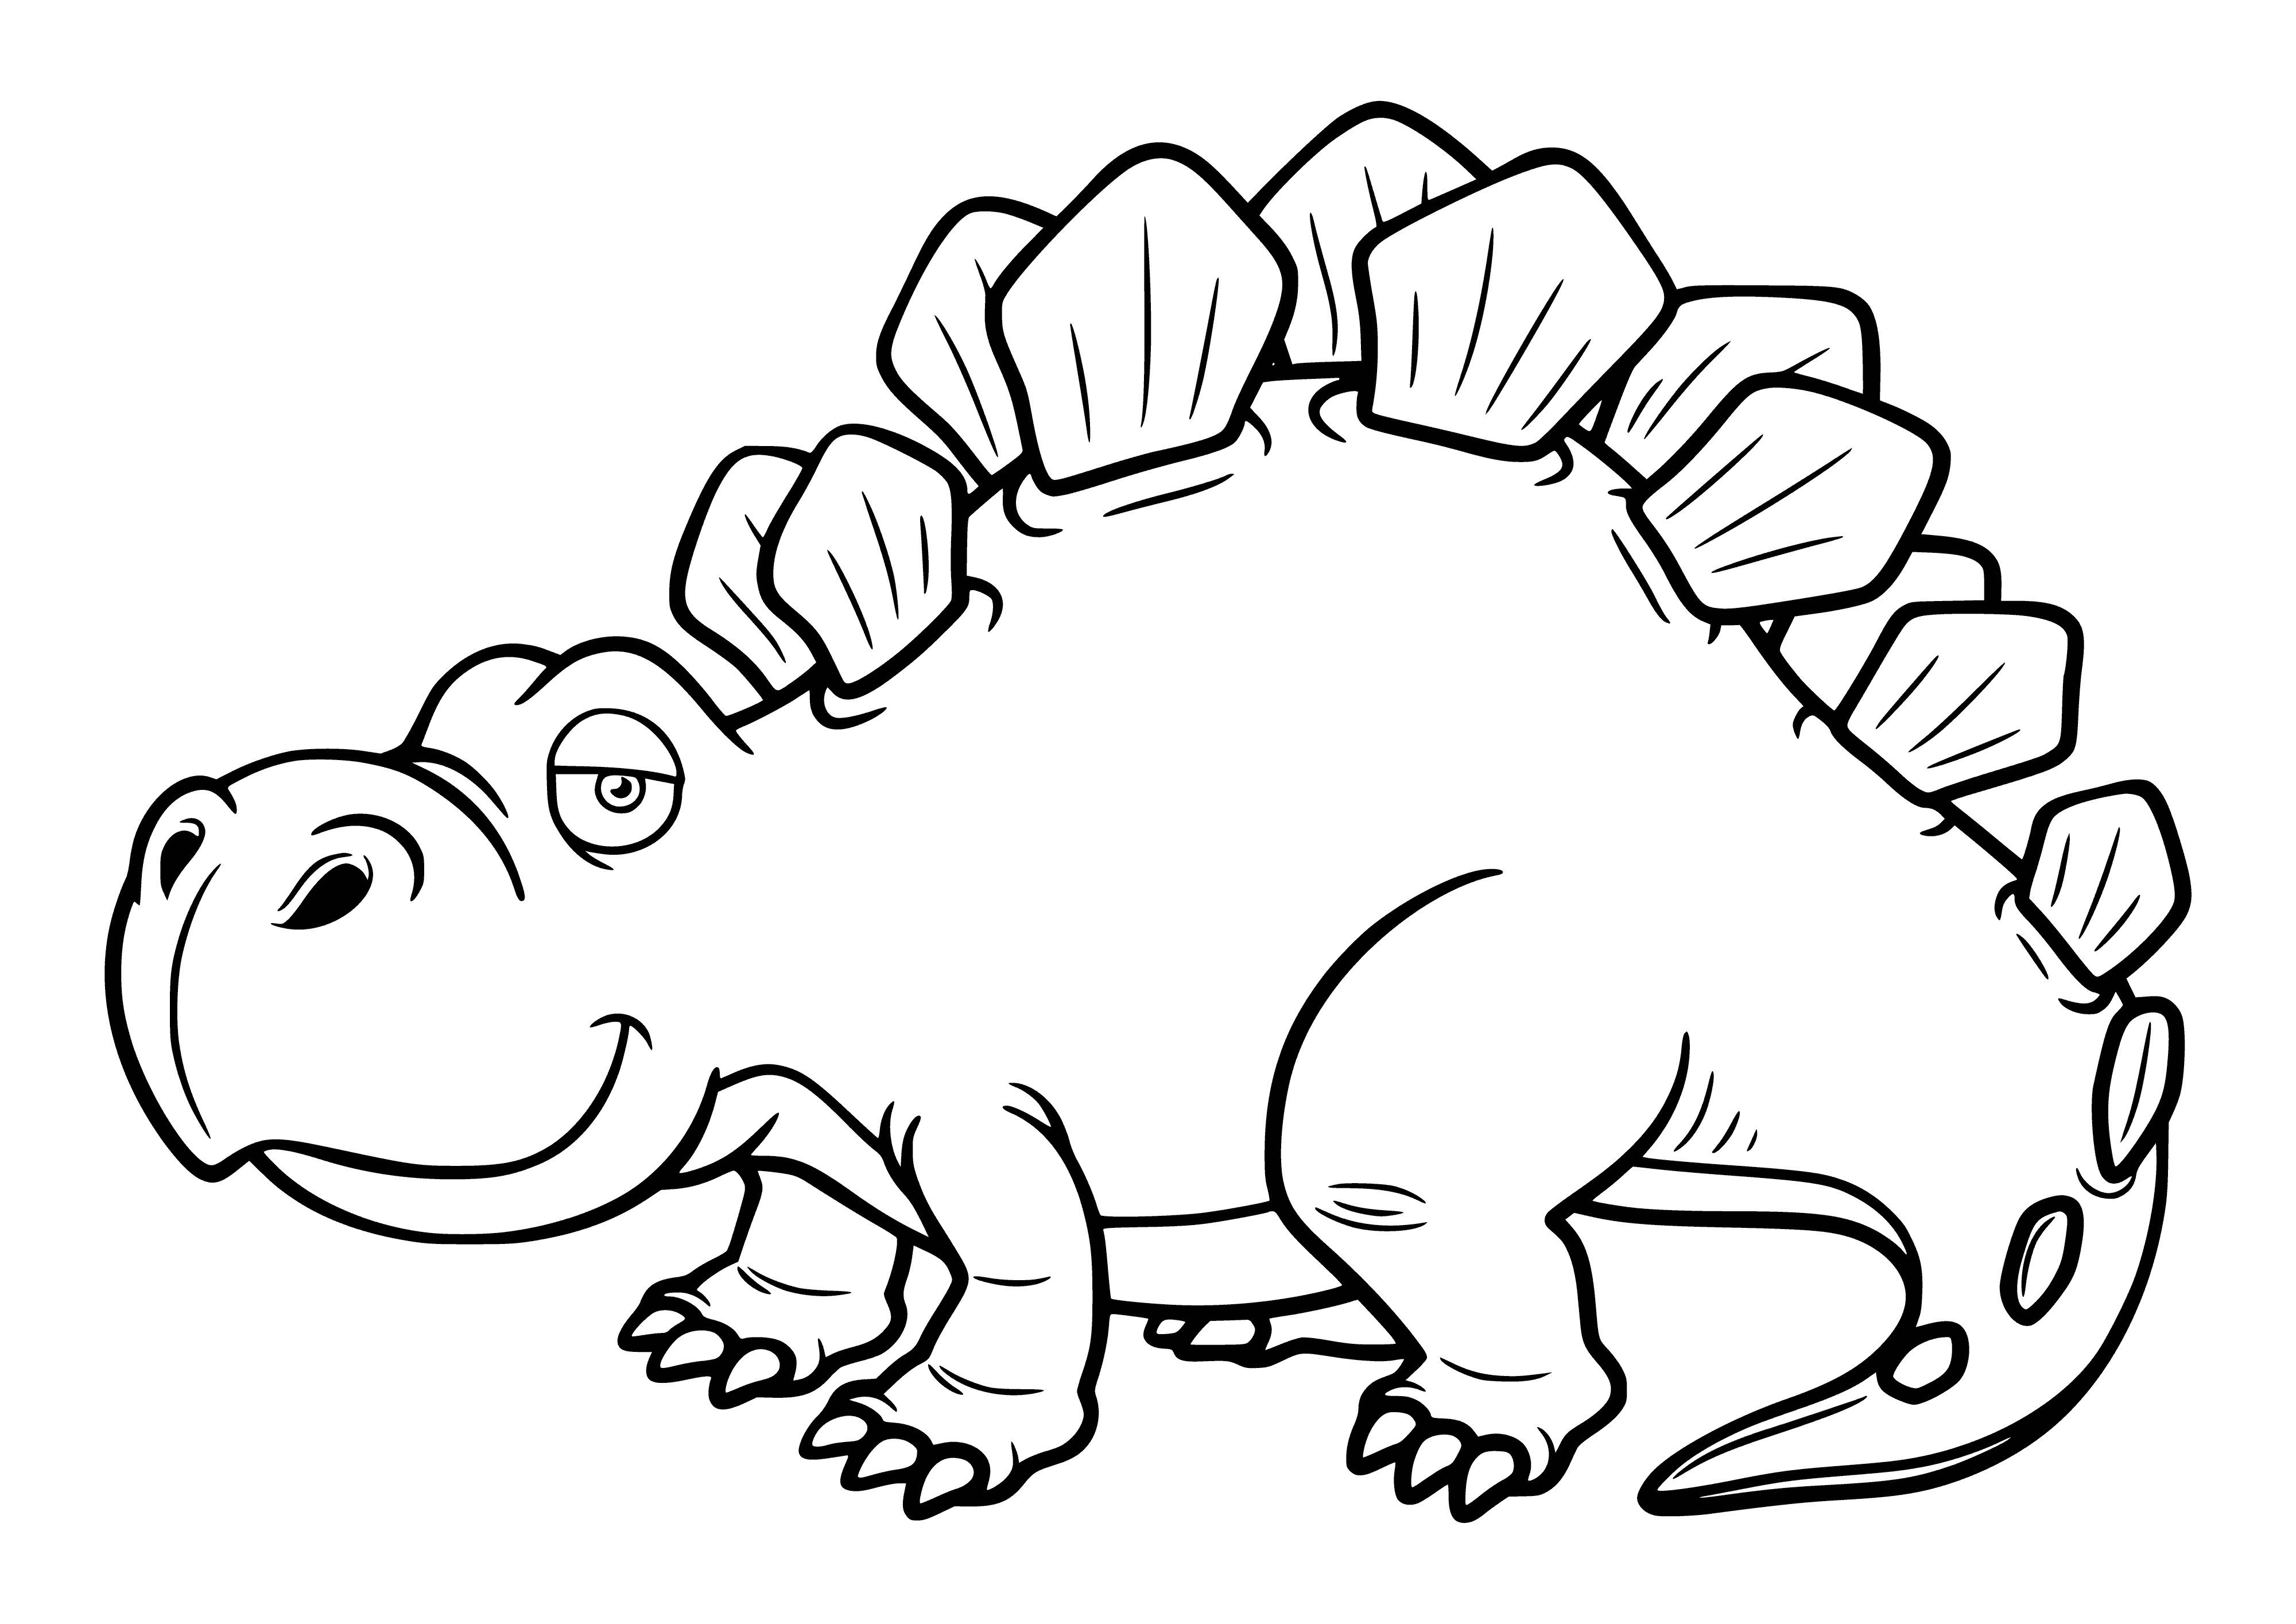 coloring page: Stegosaurus was a large four-legged plant-eating dinosaur with a long thin tail, small head, sharp teeth, and two large curved plates on its back.